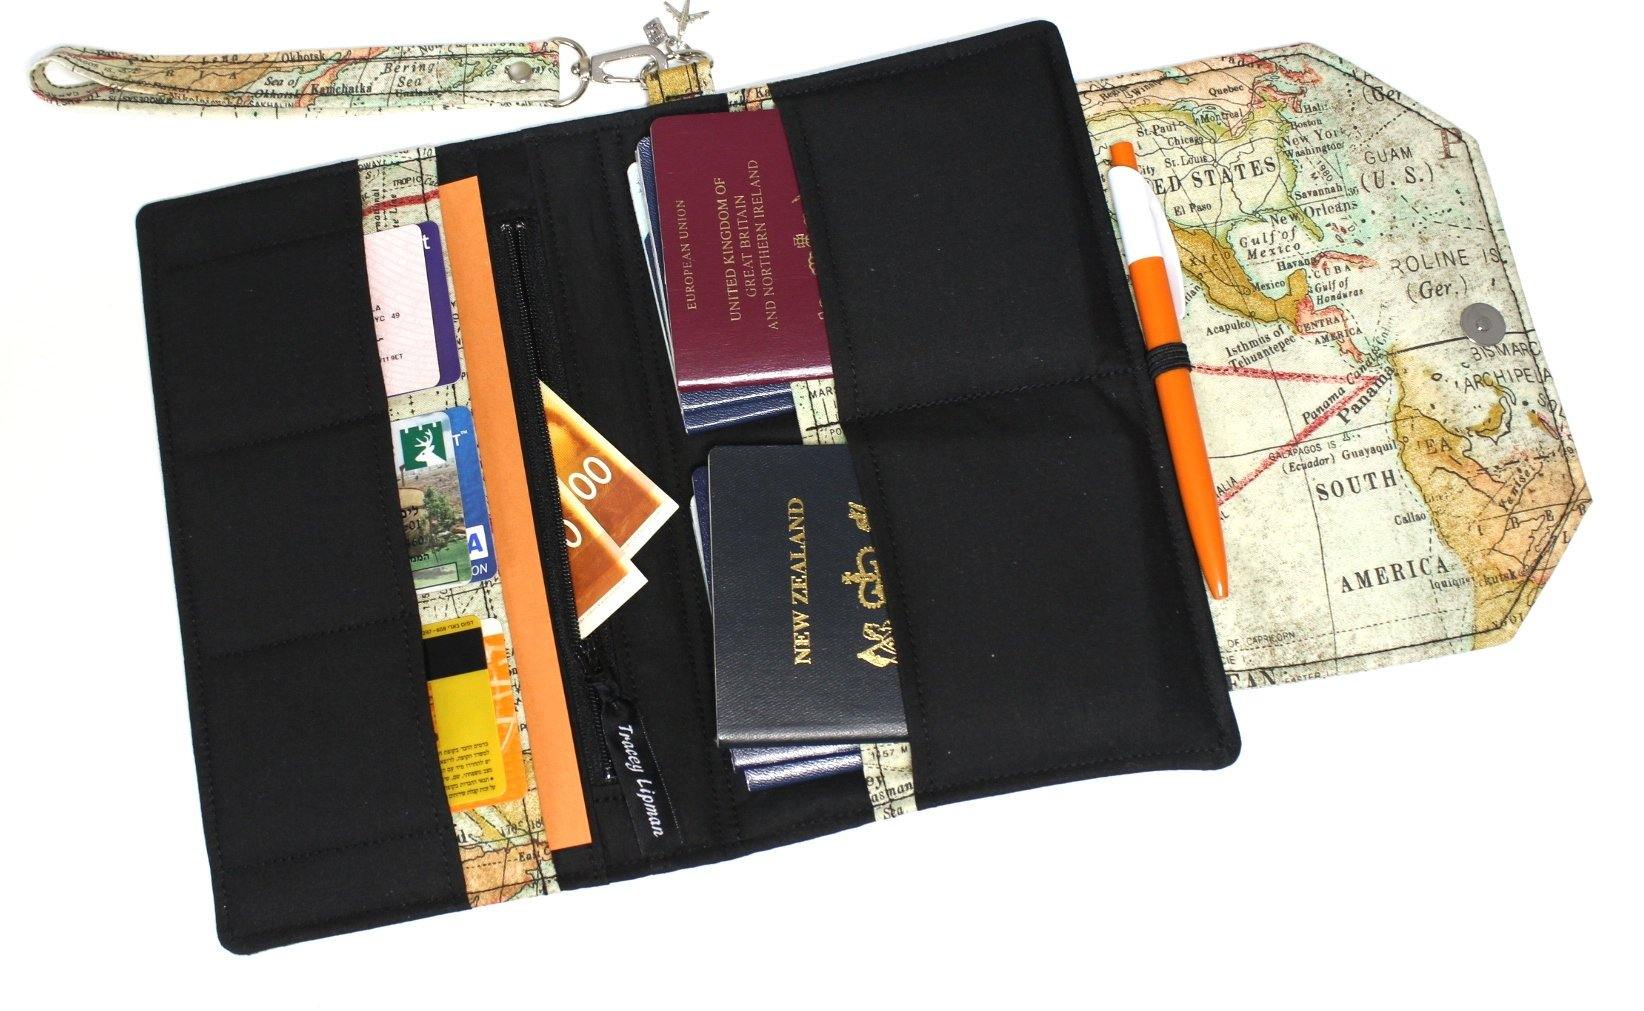 Shoppers Love This Travel Document Holder